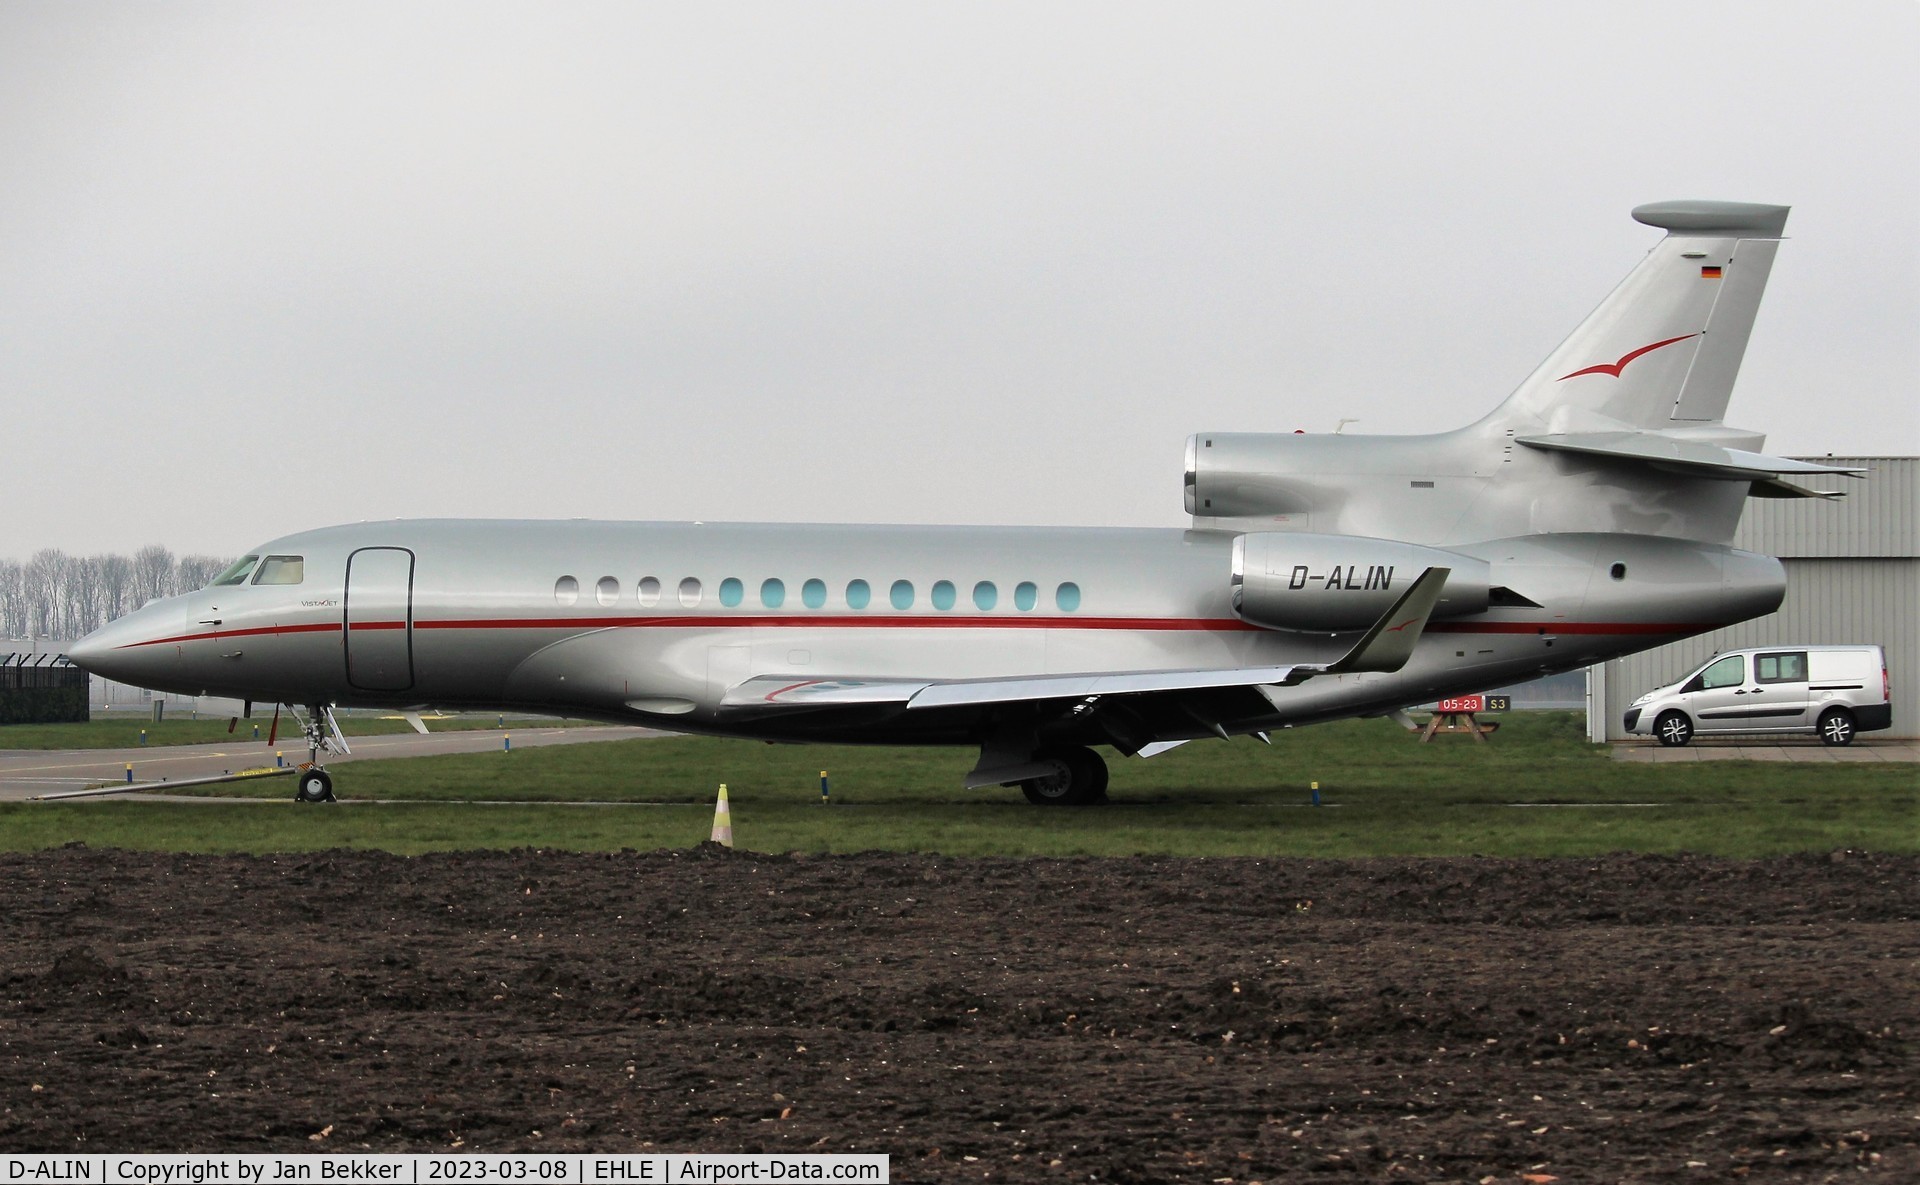 D-ALIN, 2009 Dassault Falcon 7X C/N 54, Now in its new outfit of VistaJet at Lelystad Airport